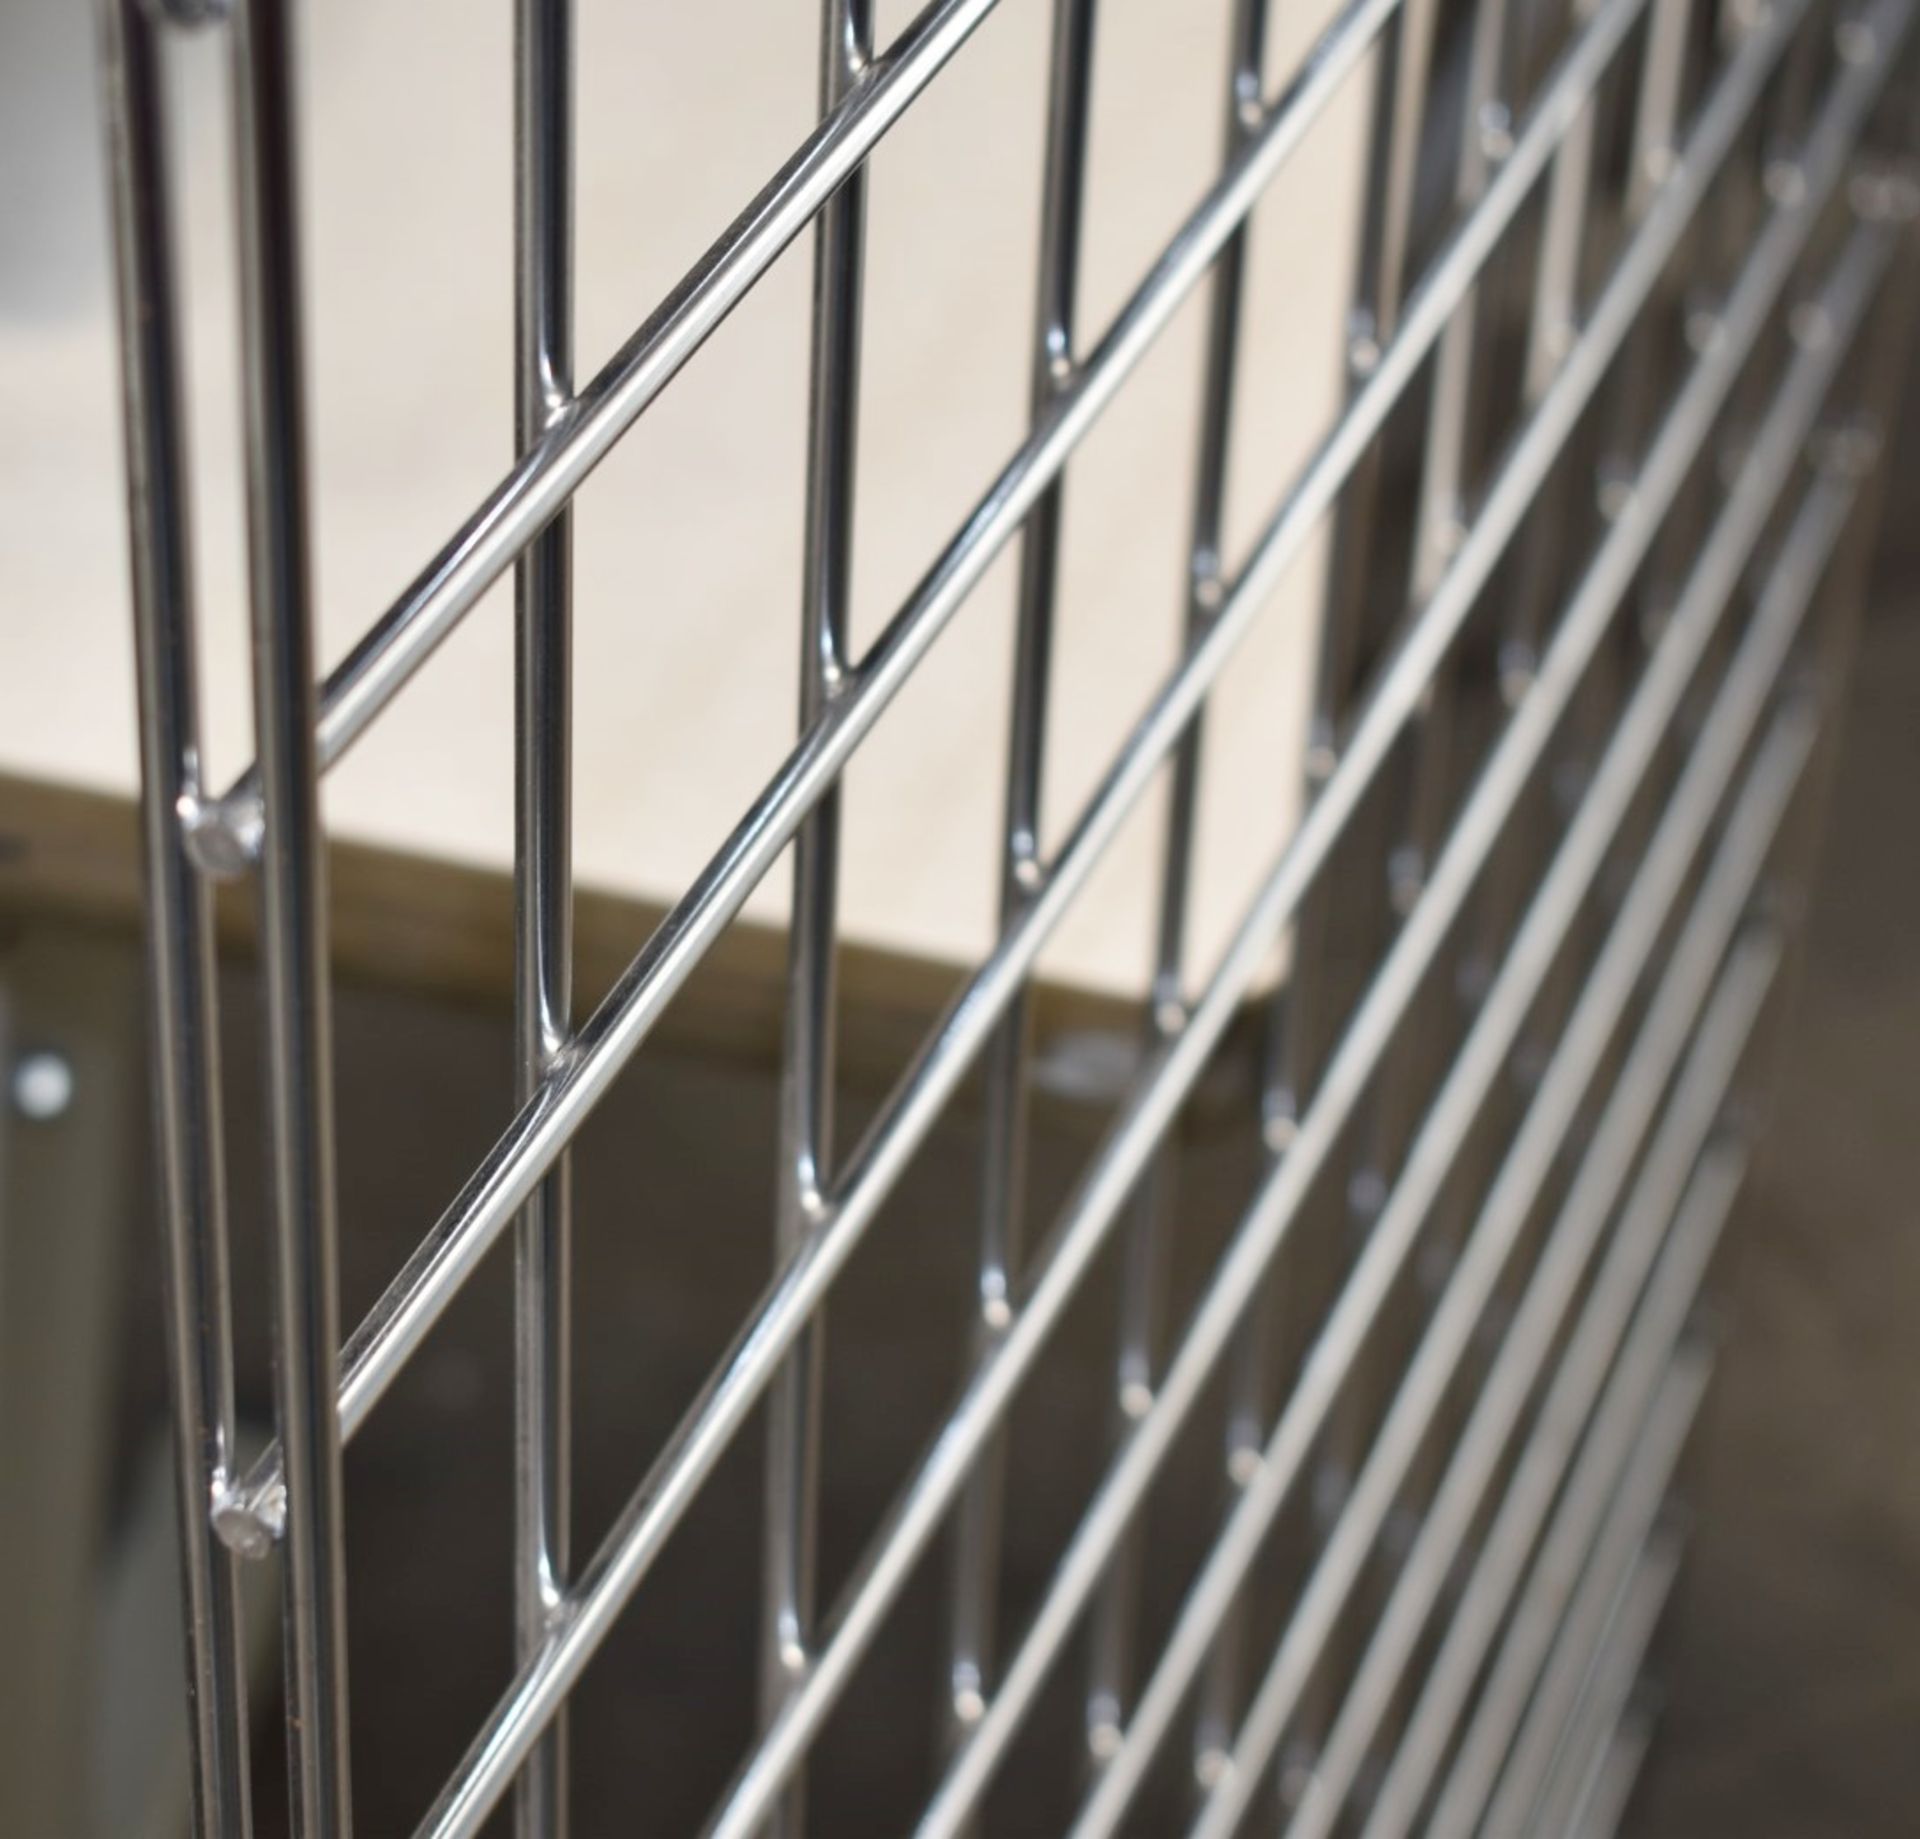 6 x Gridwall Mesh Wall Panels - Heavy Metal Construction With Chrome - Ideal For Creating Pet Cages! - Image 6 of 8